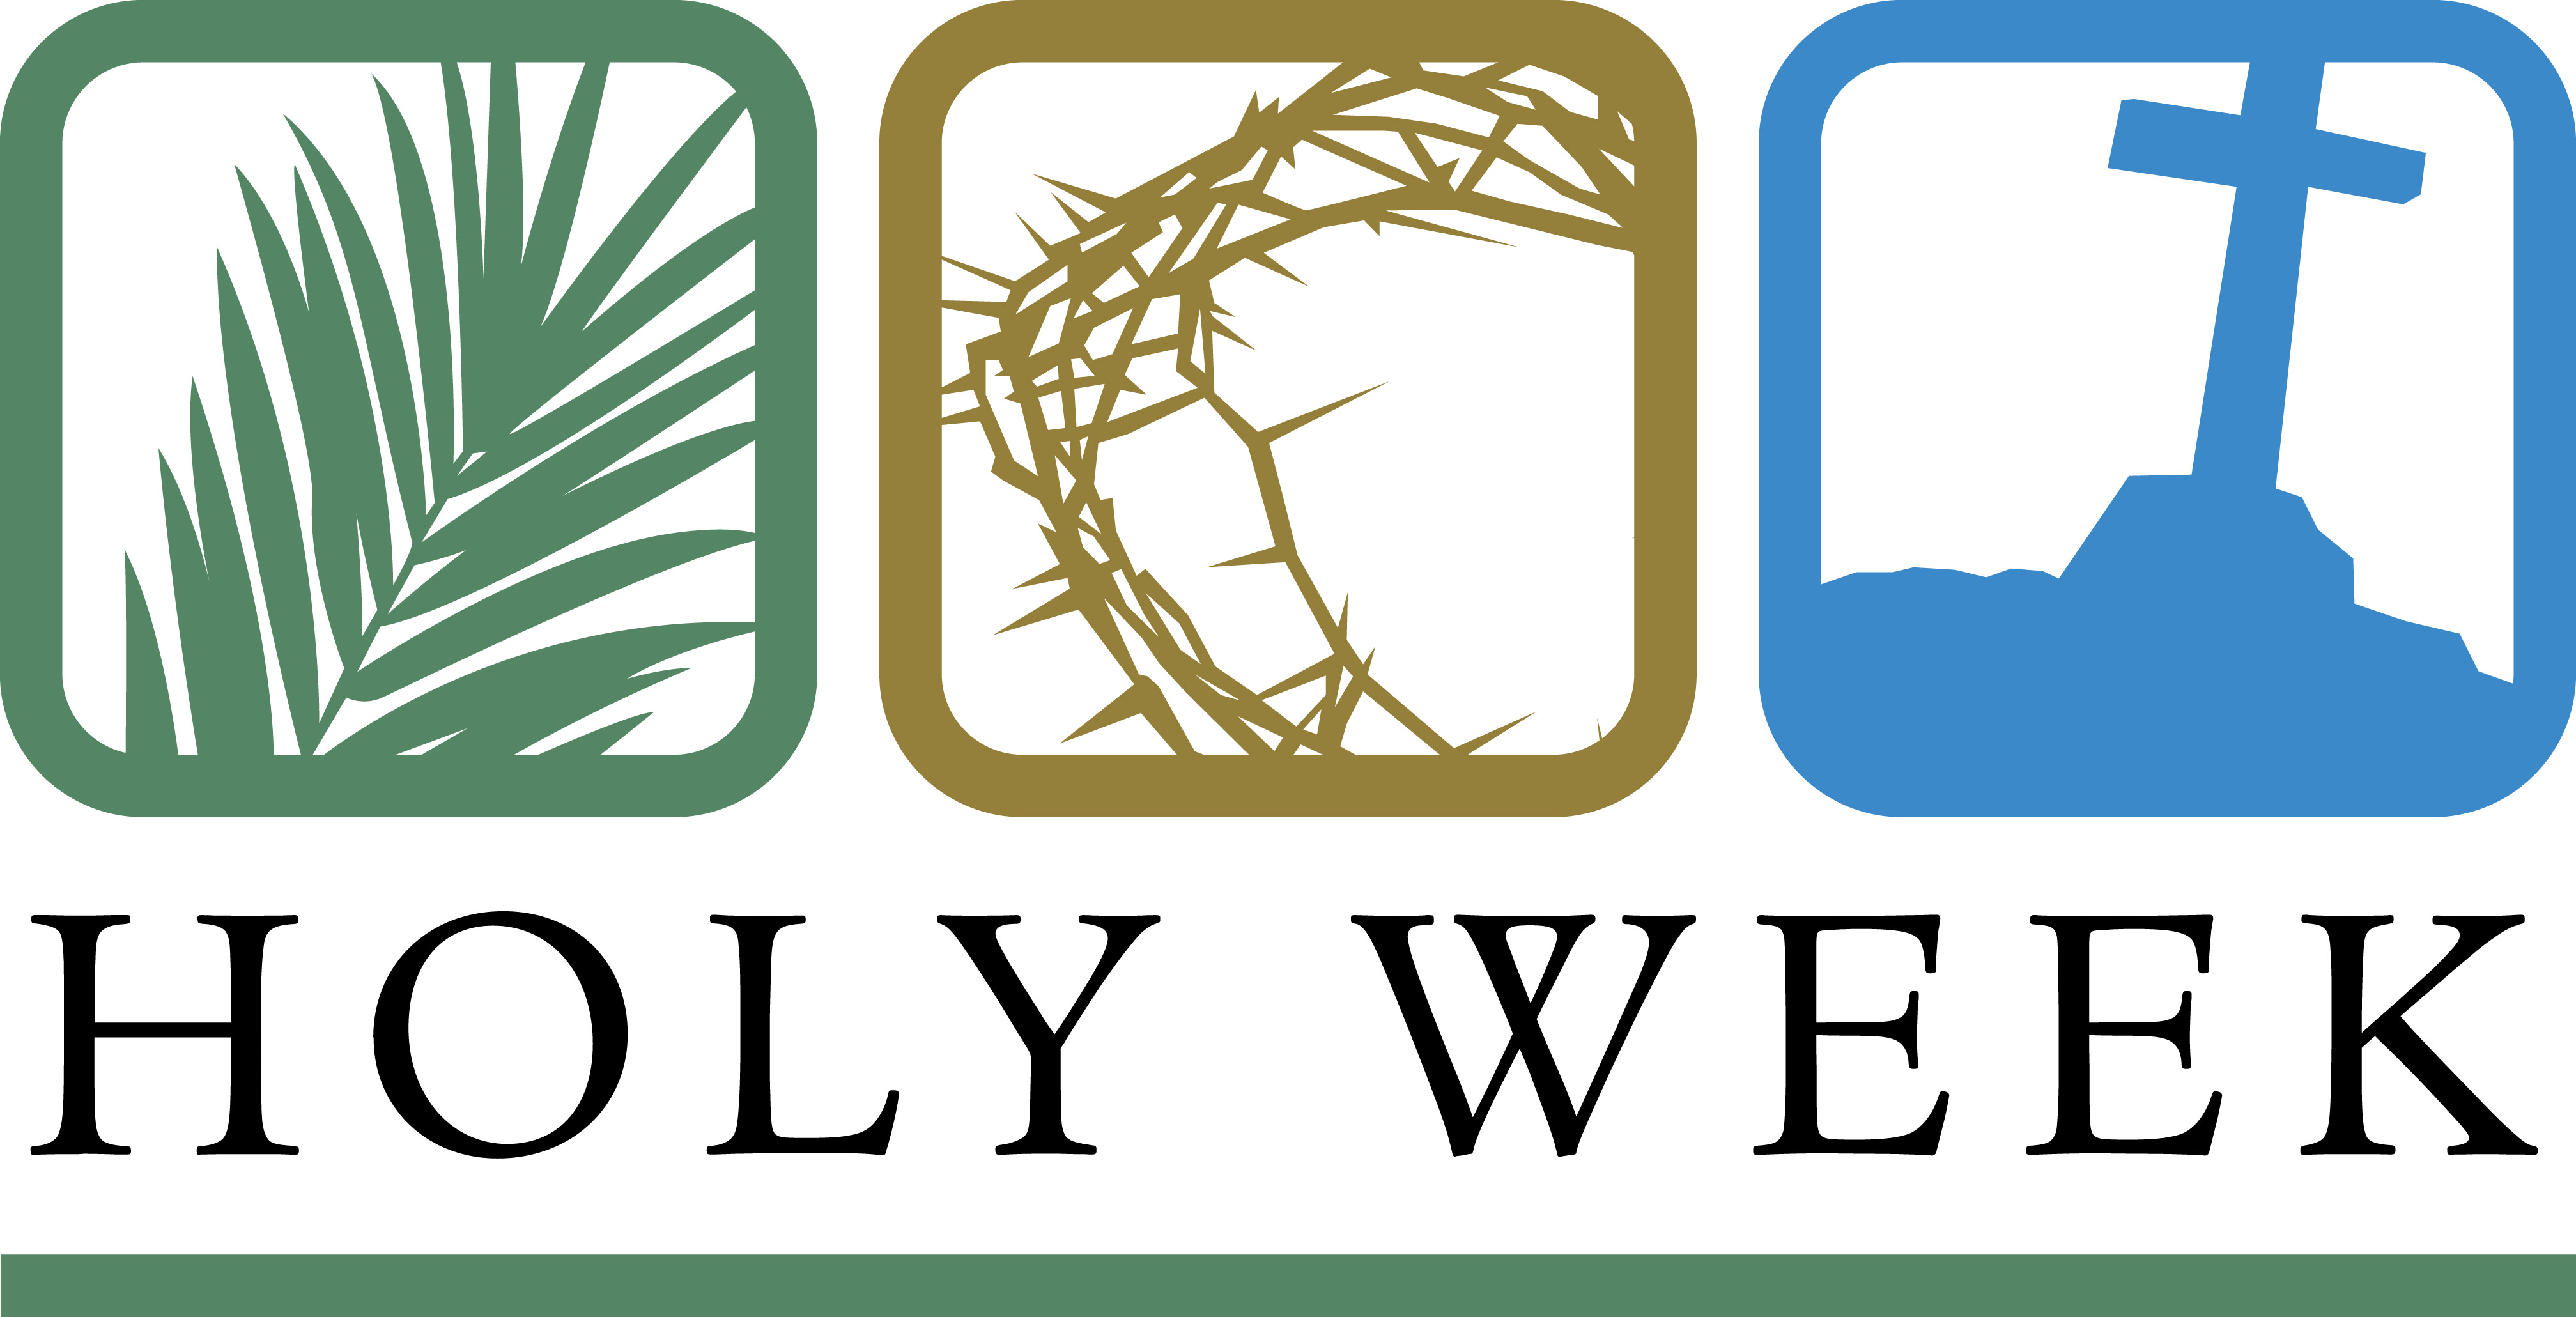 On The Baptist Observance Of Holy Week   Walking Together Ministries